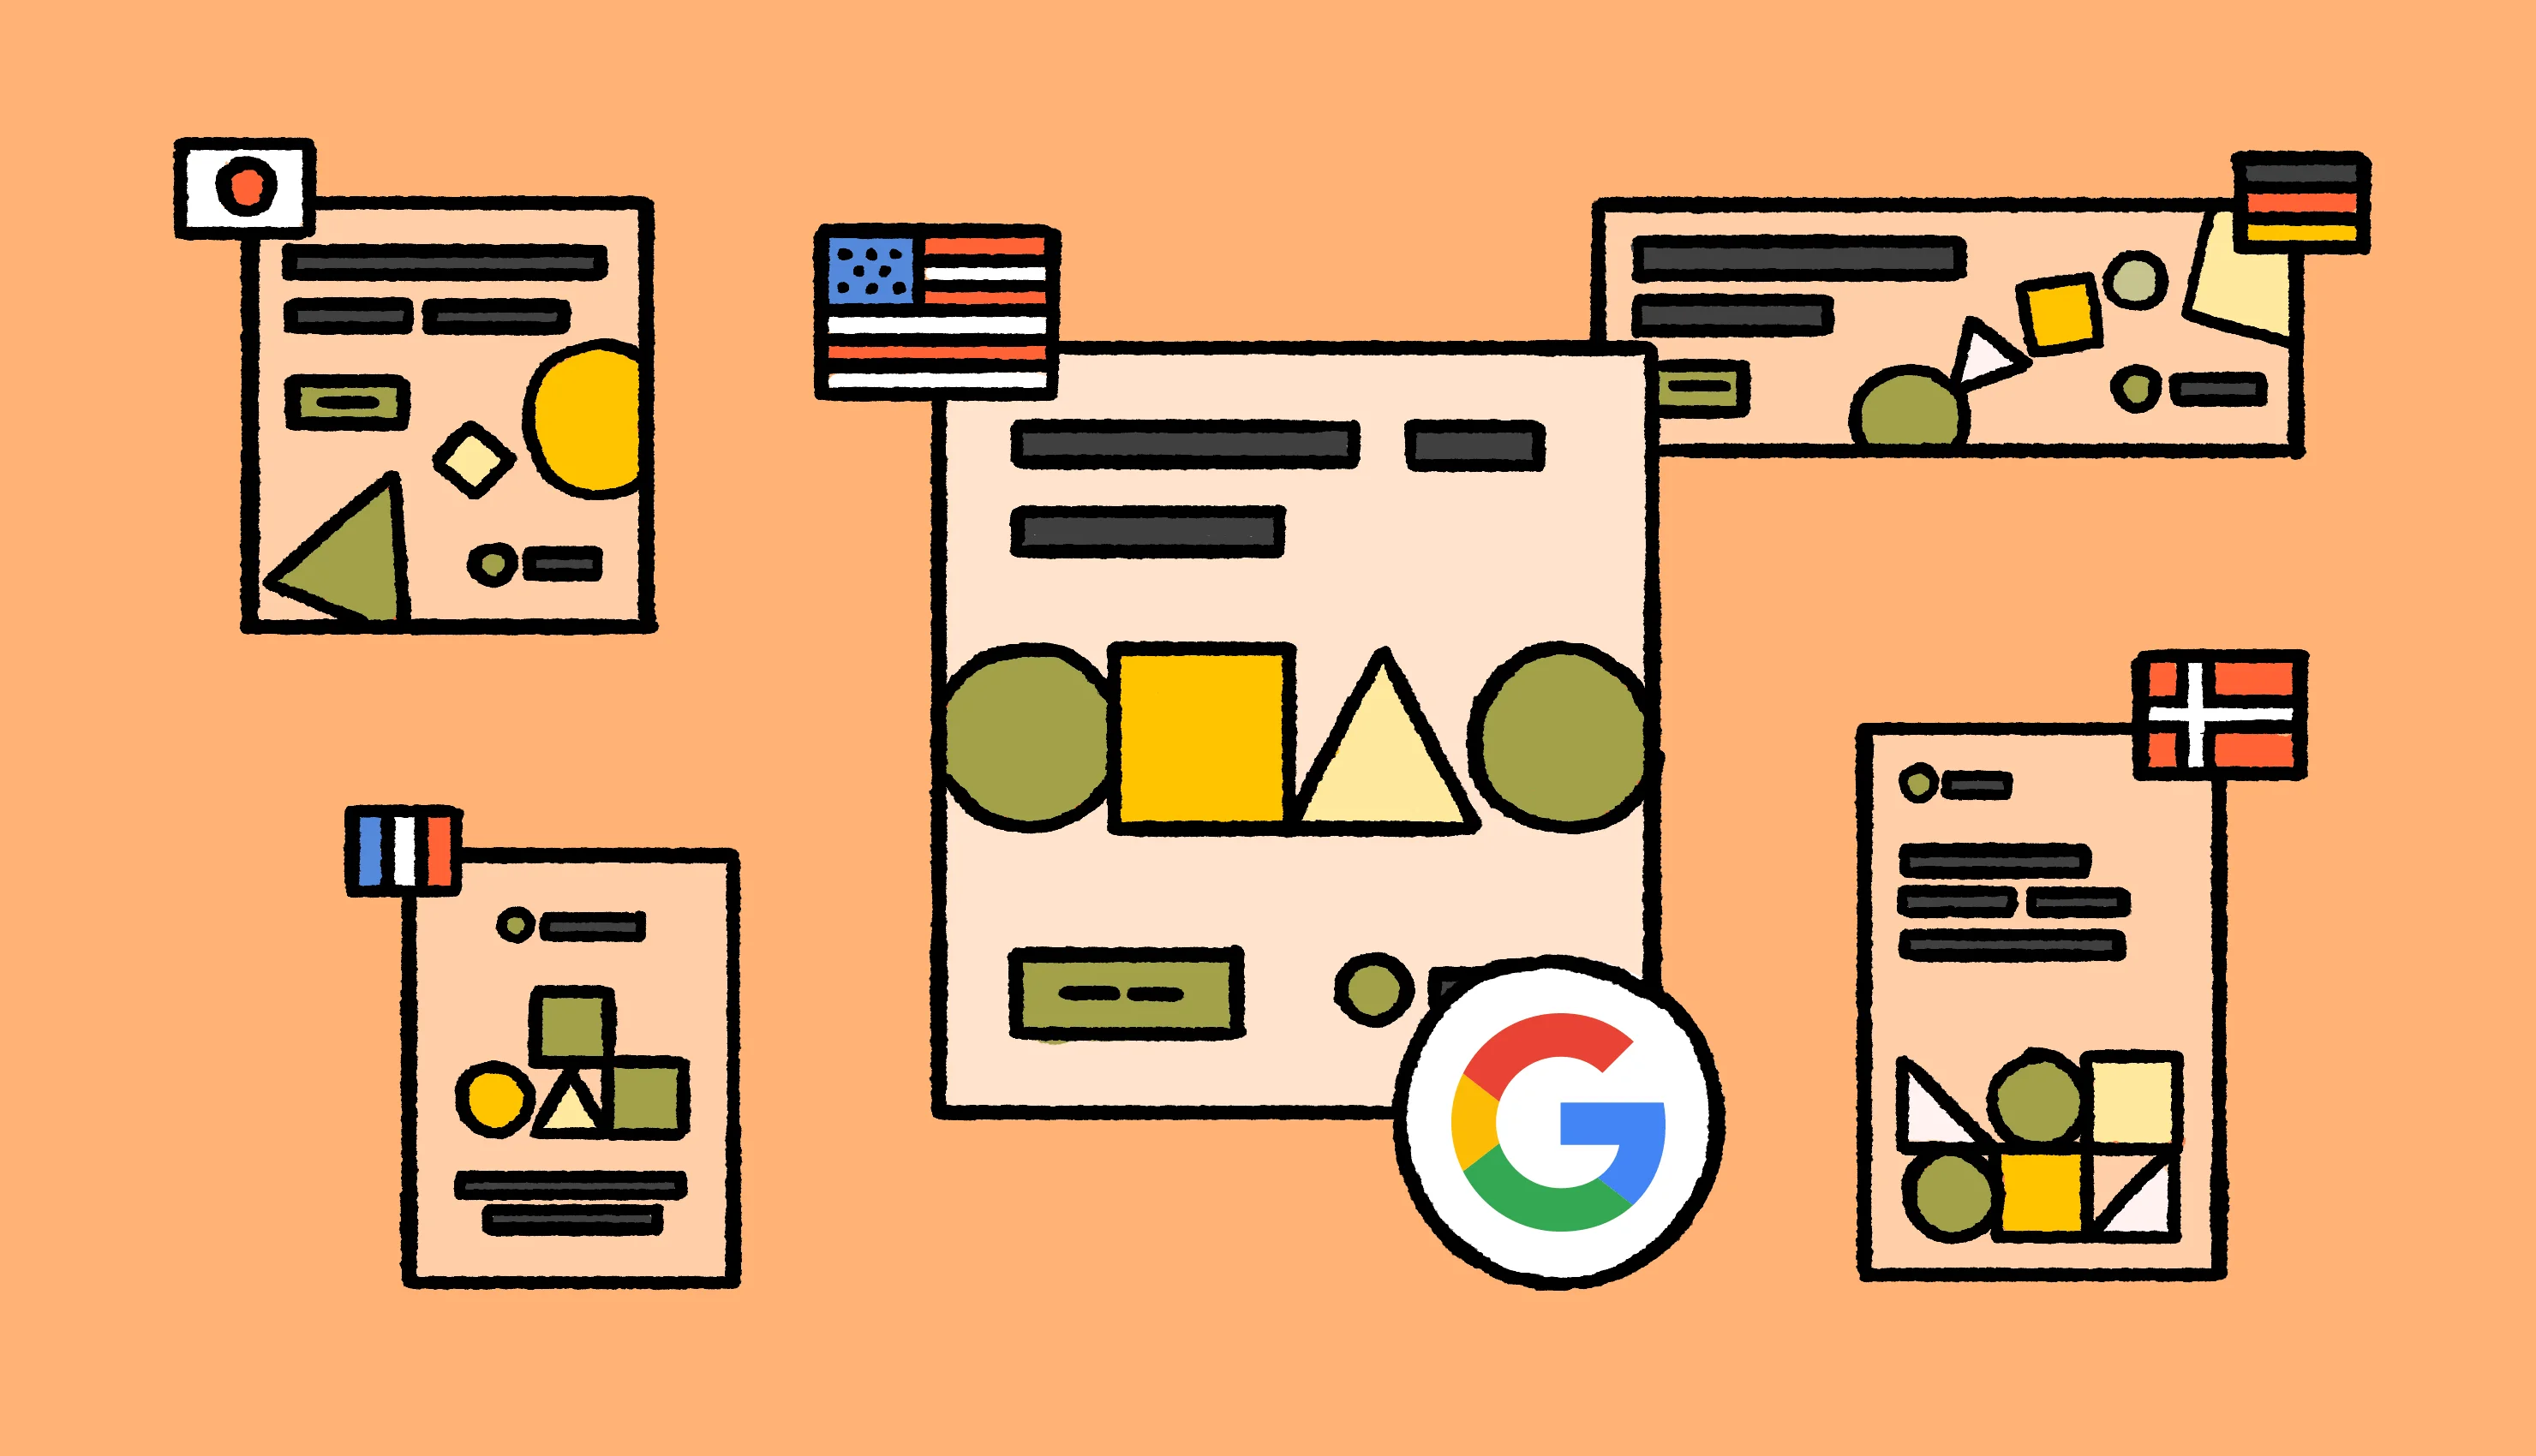 Google Ads localization: 12 tips to nail it